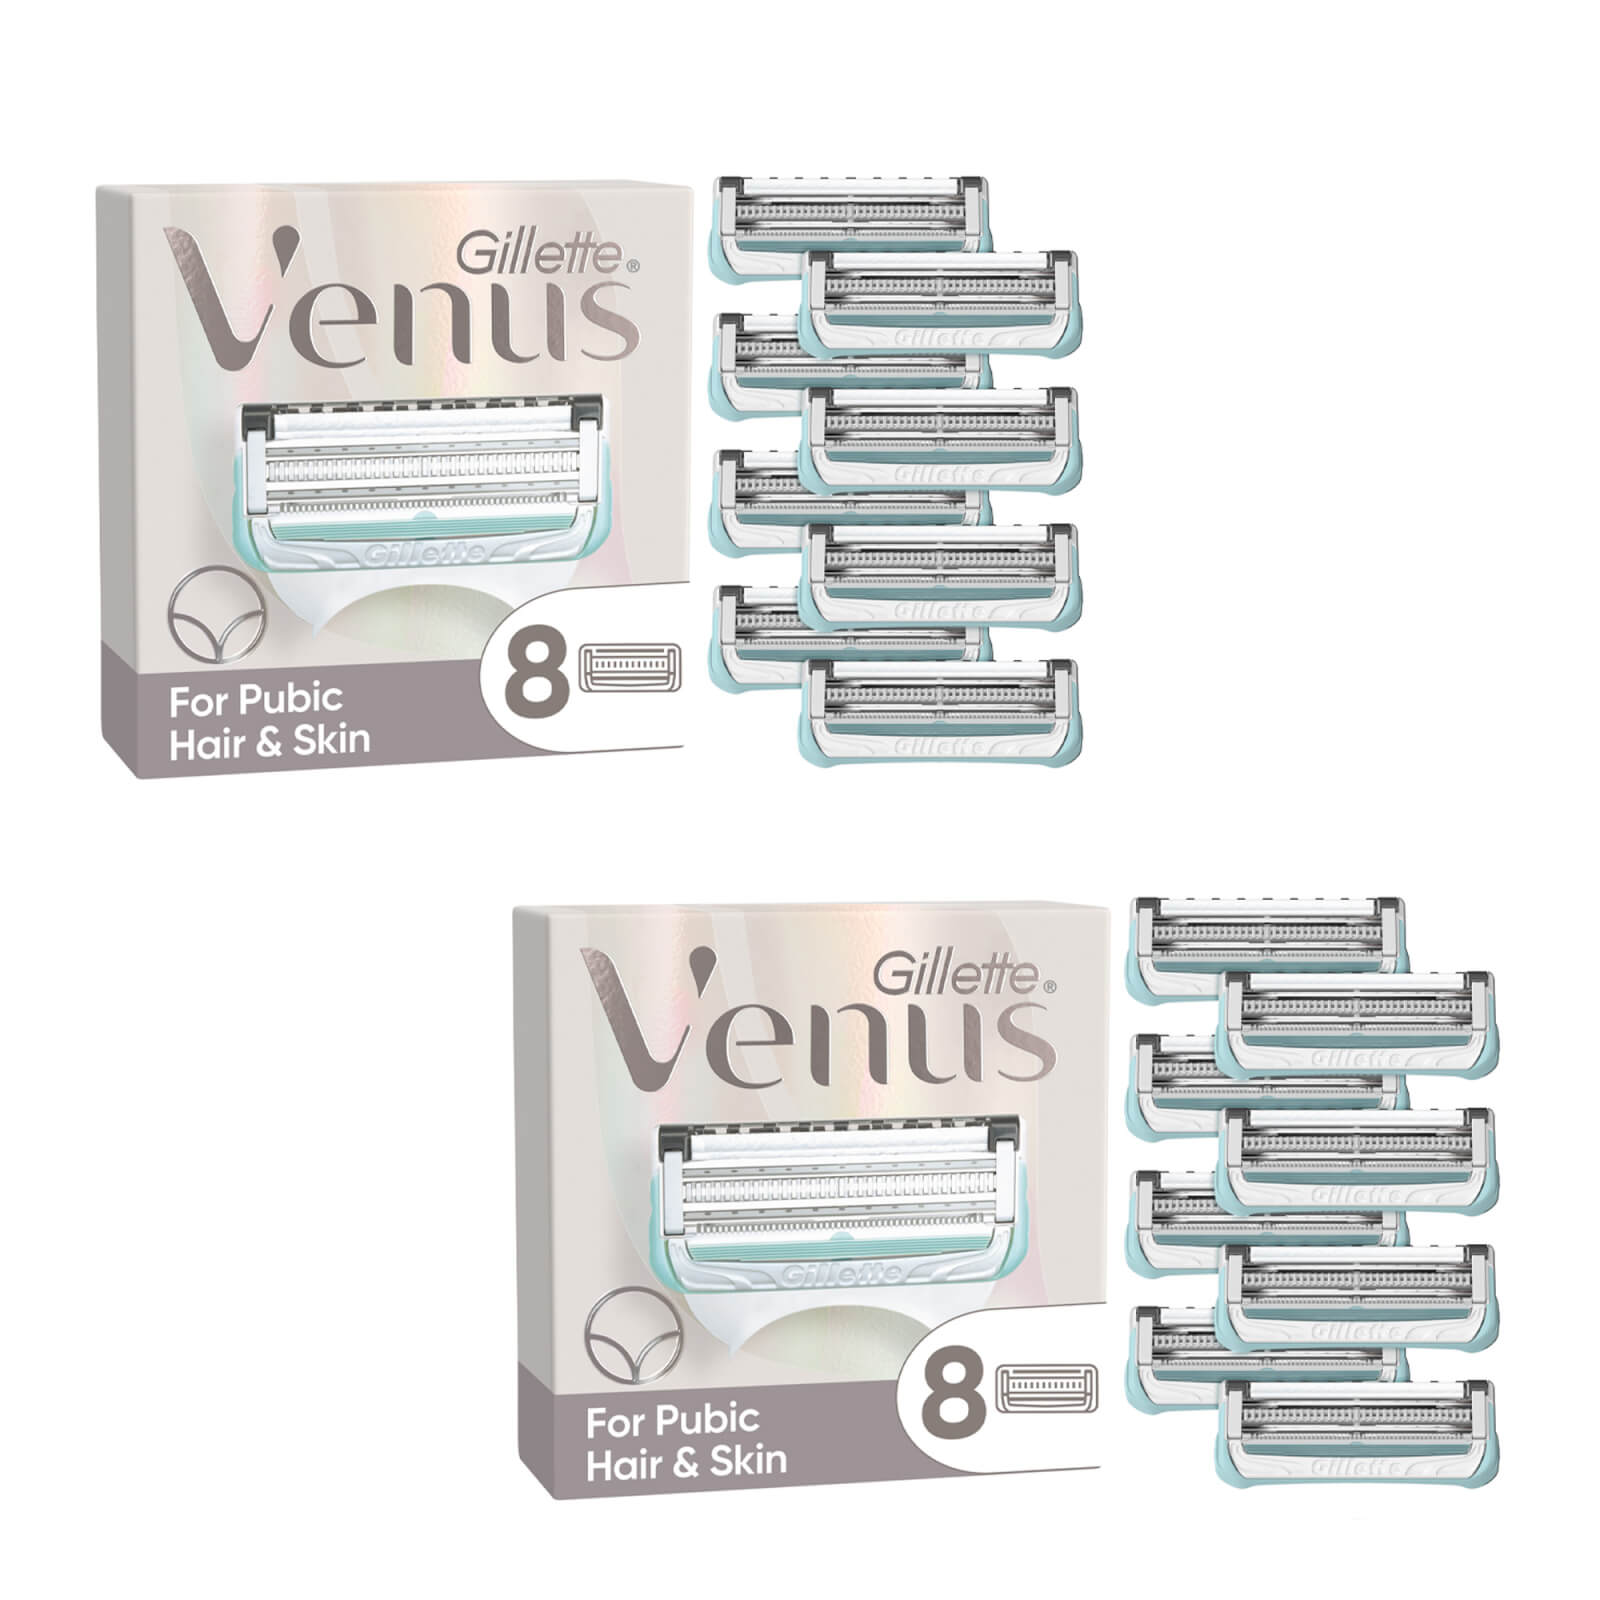 Venus Satin Care Razor Blades for Pubic Hair and Skin - 16 pack